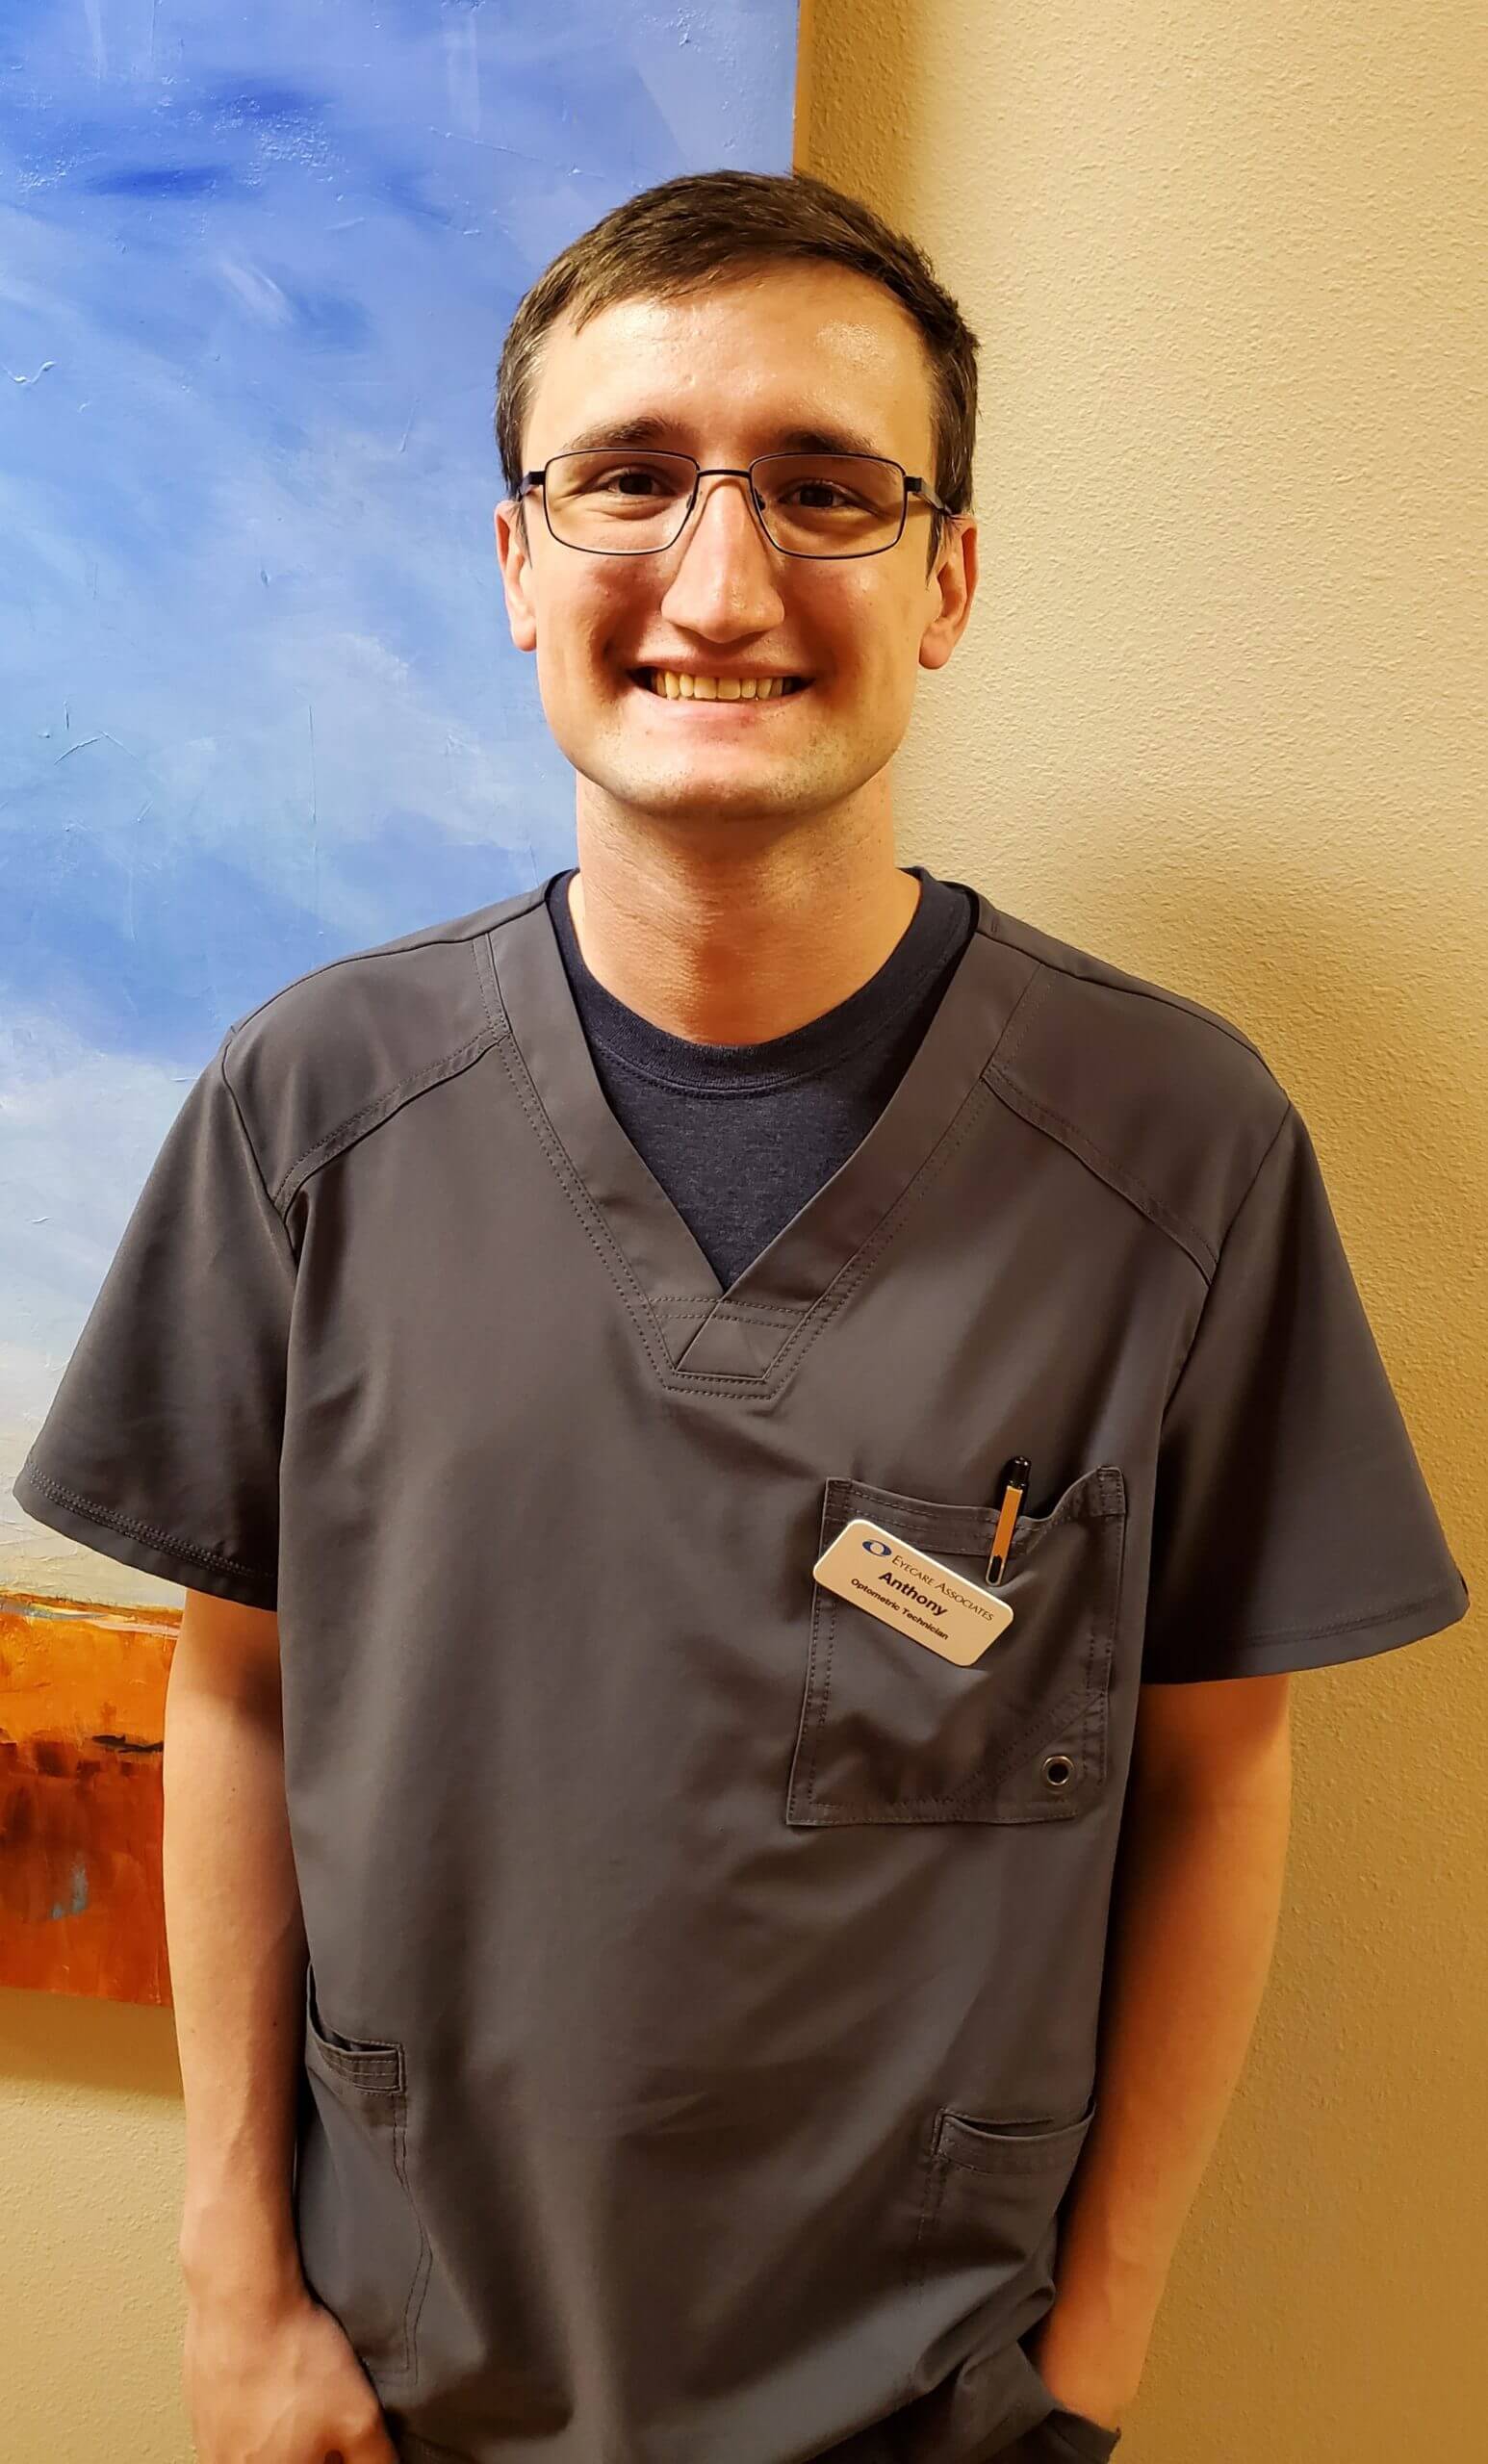 Anthony - Our Eye Care Staff